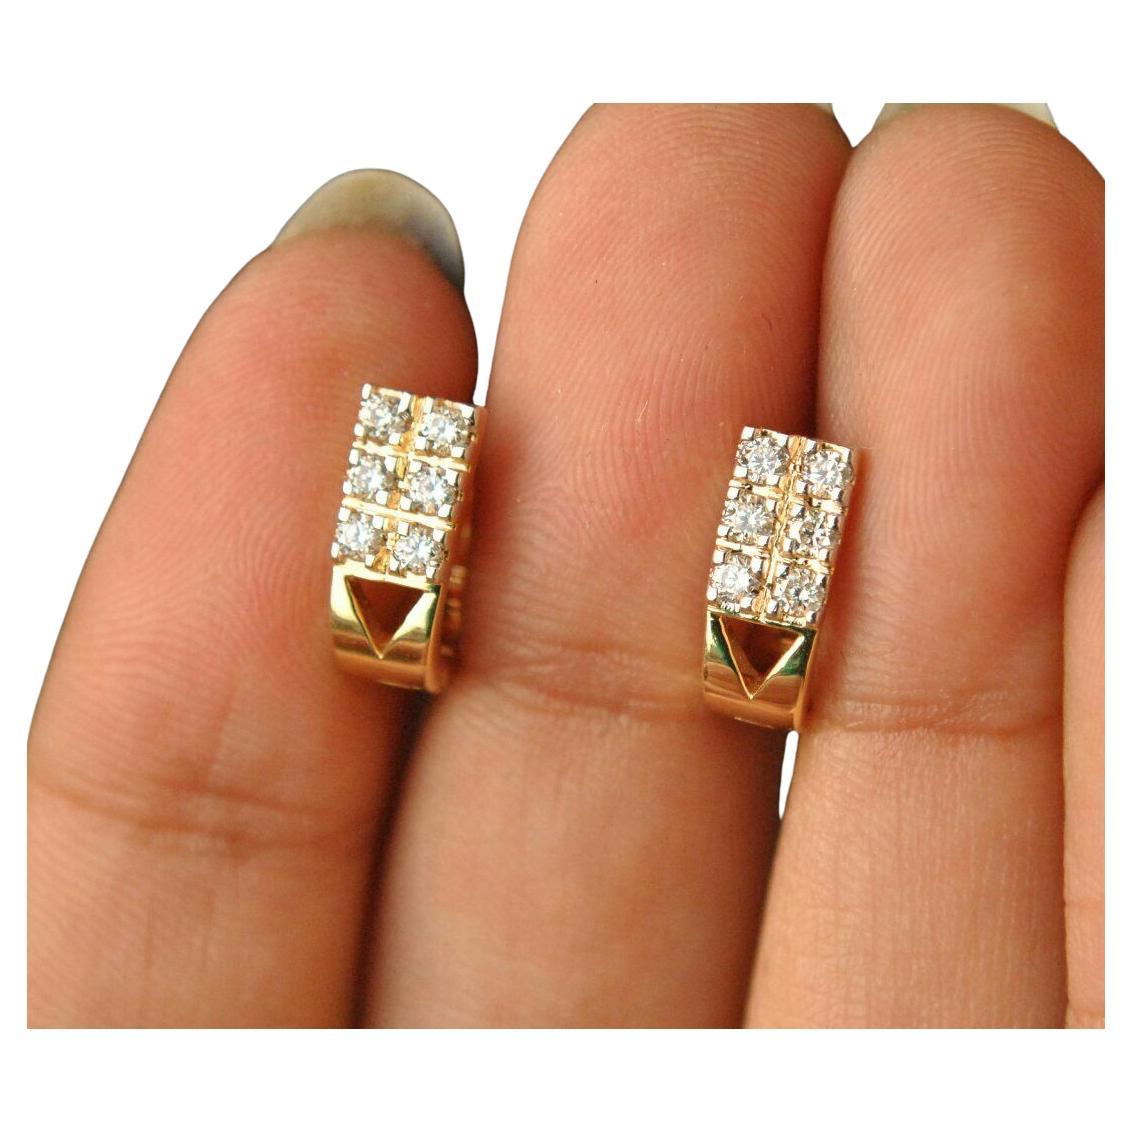 Diamond Huggie Earrings 14K Solid Yellow Gold U Shape Small Clicker Summer Gift. For Sale